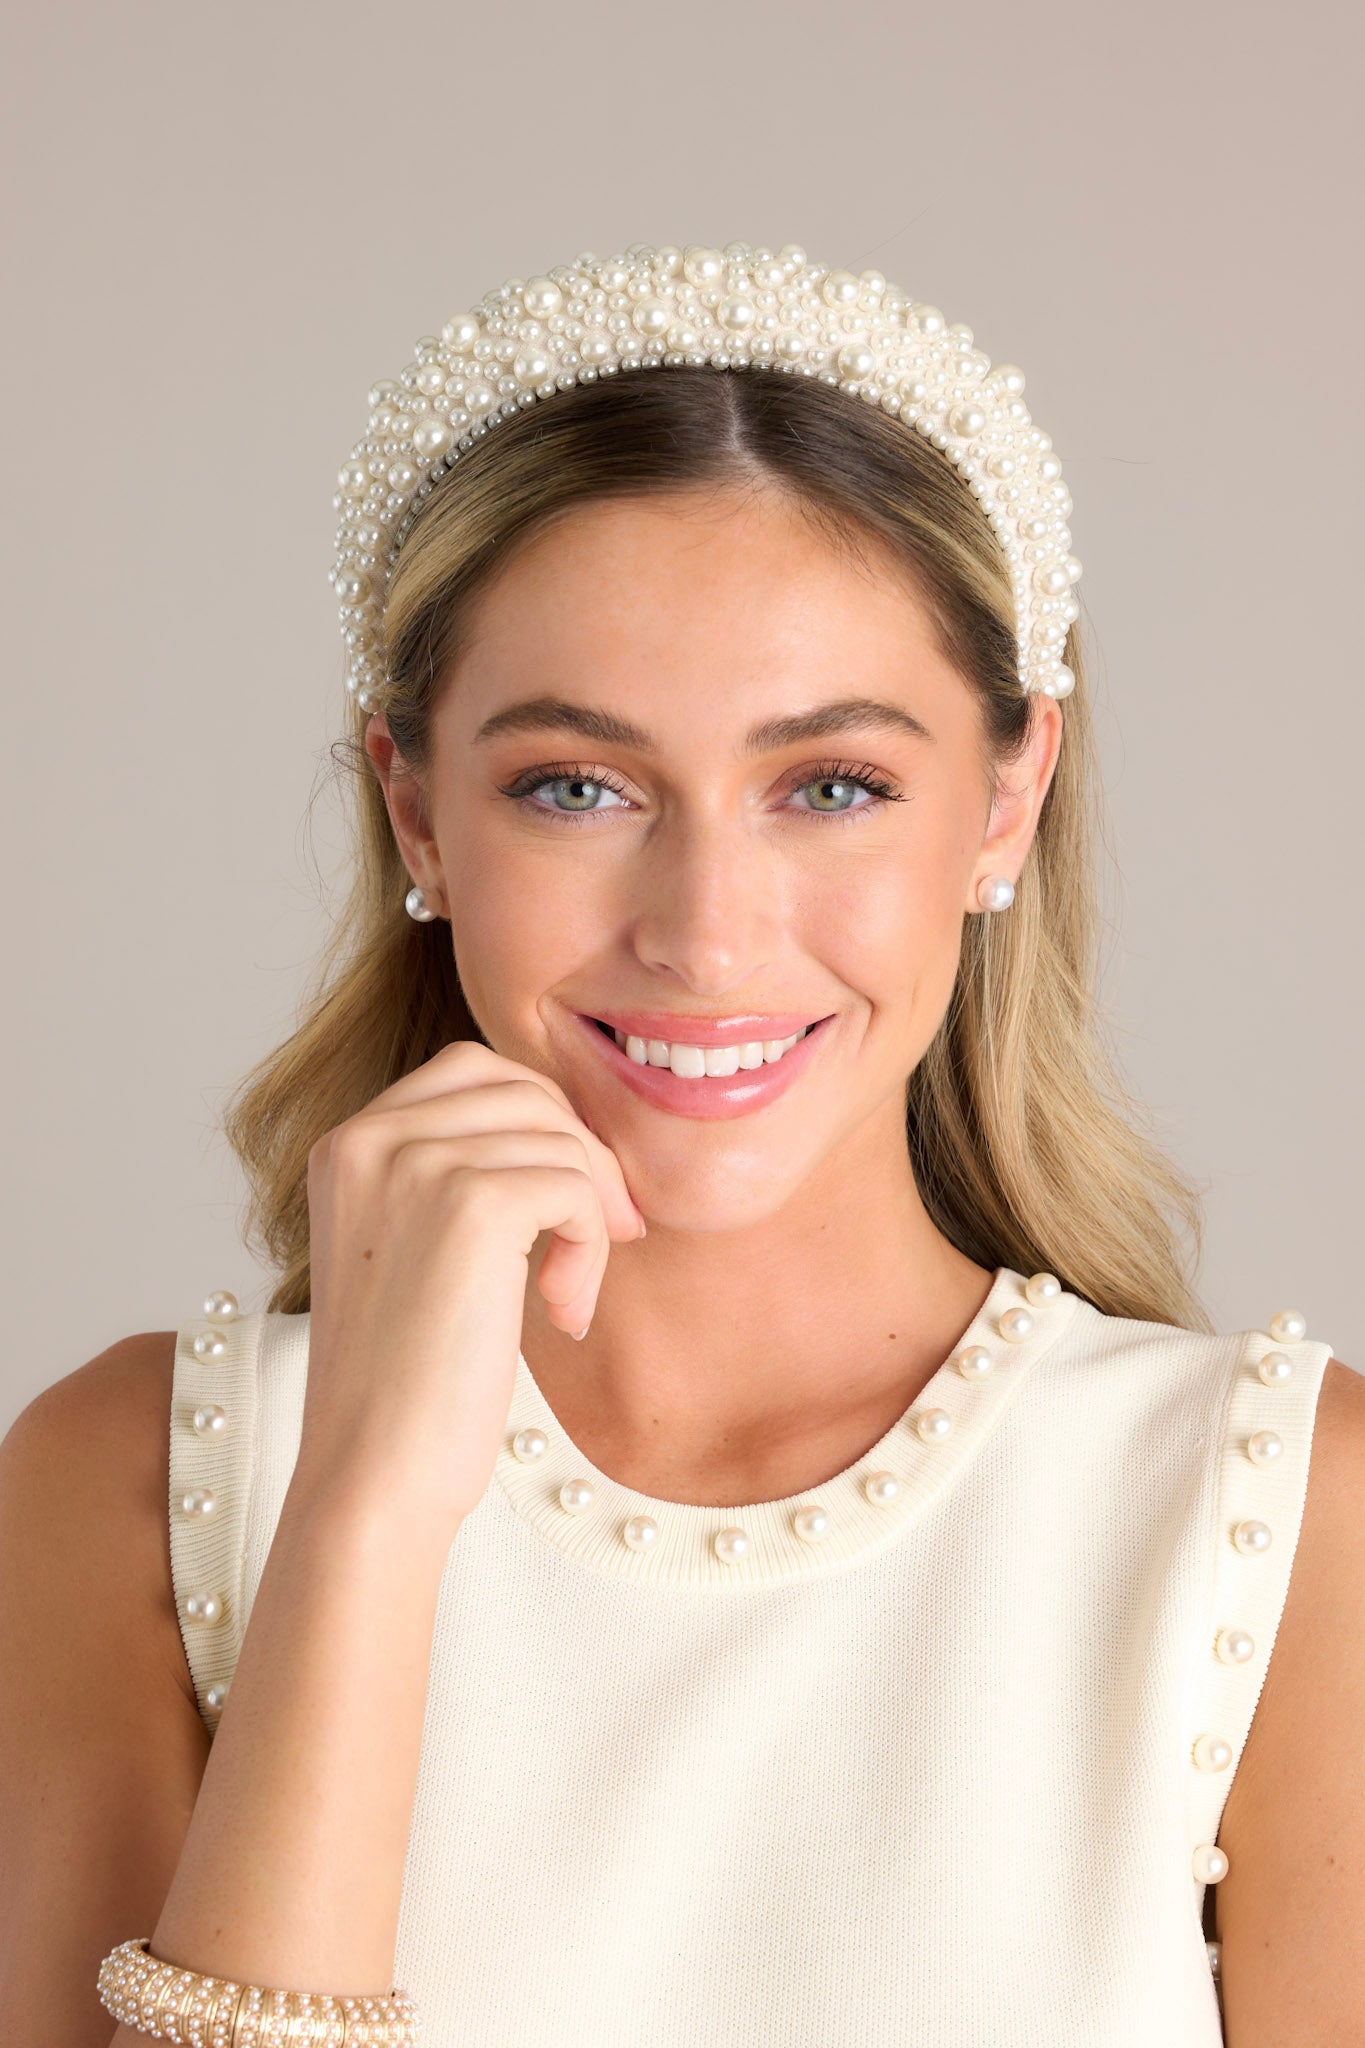 Front view of this headband that is adorned with many white faux pearls varying in size, and a thick band.